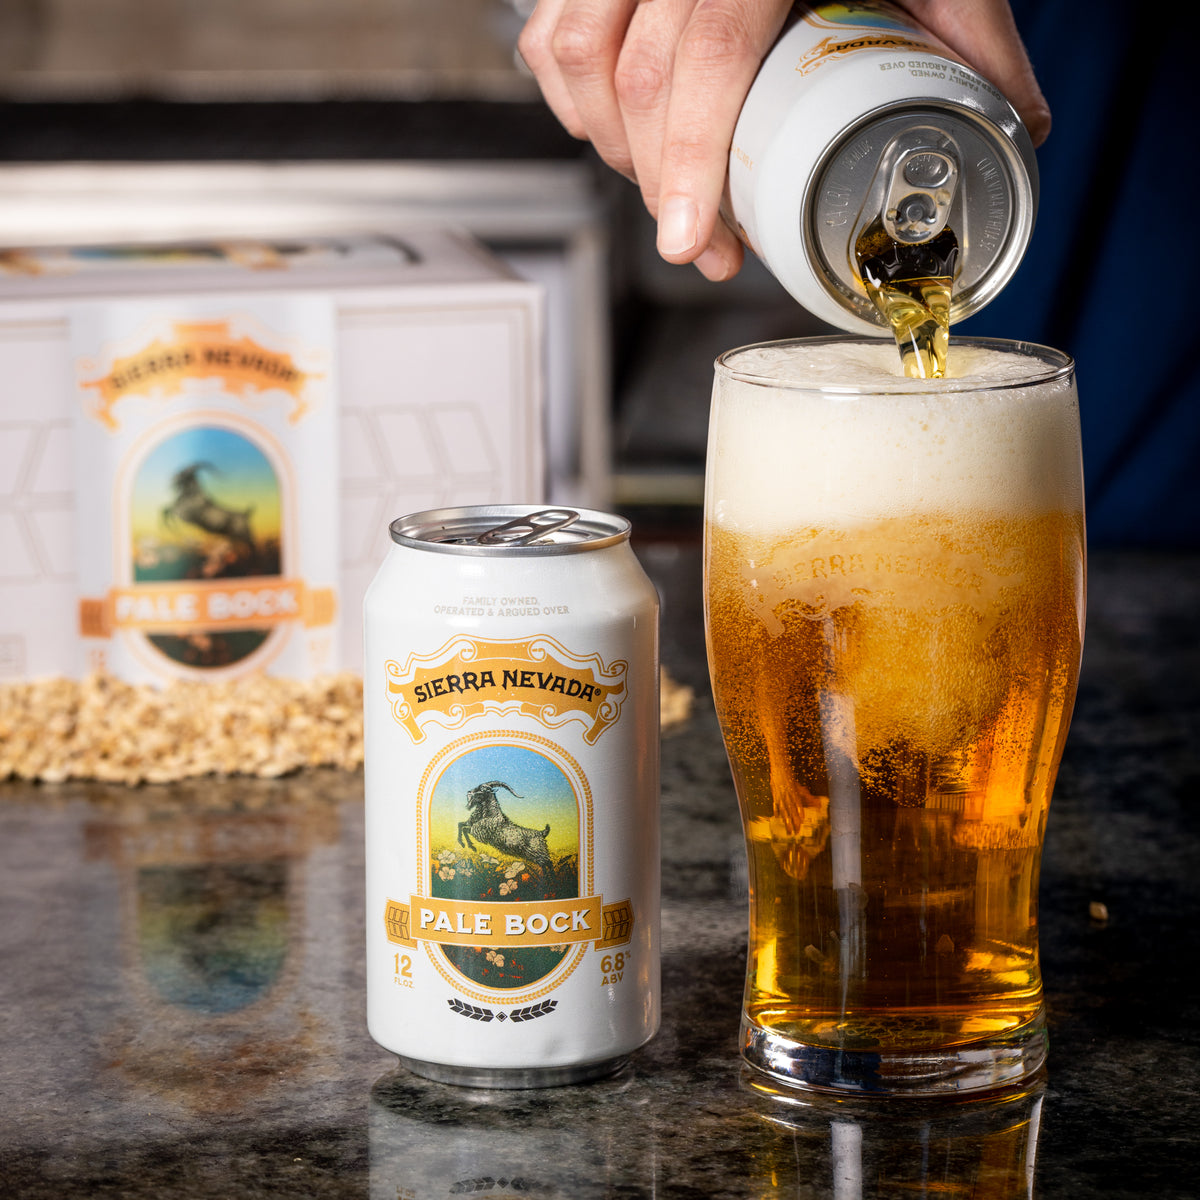 A can of Sierra Nevada Pale Bock is poured into a pint glass.